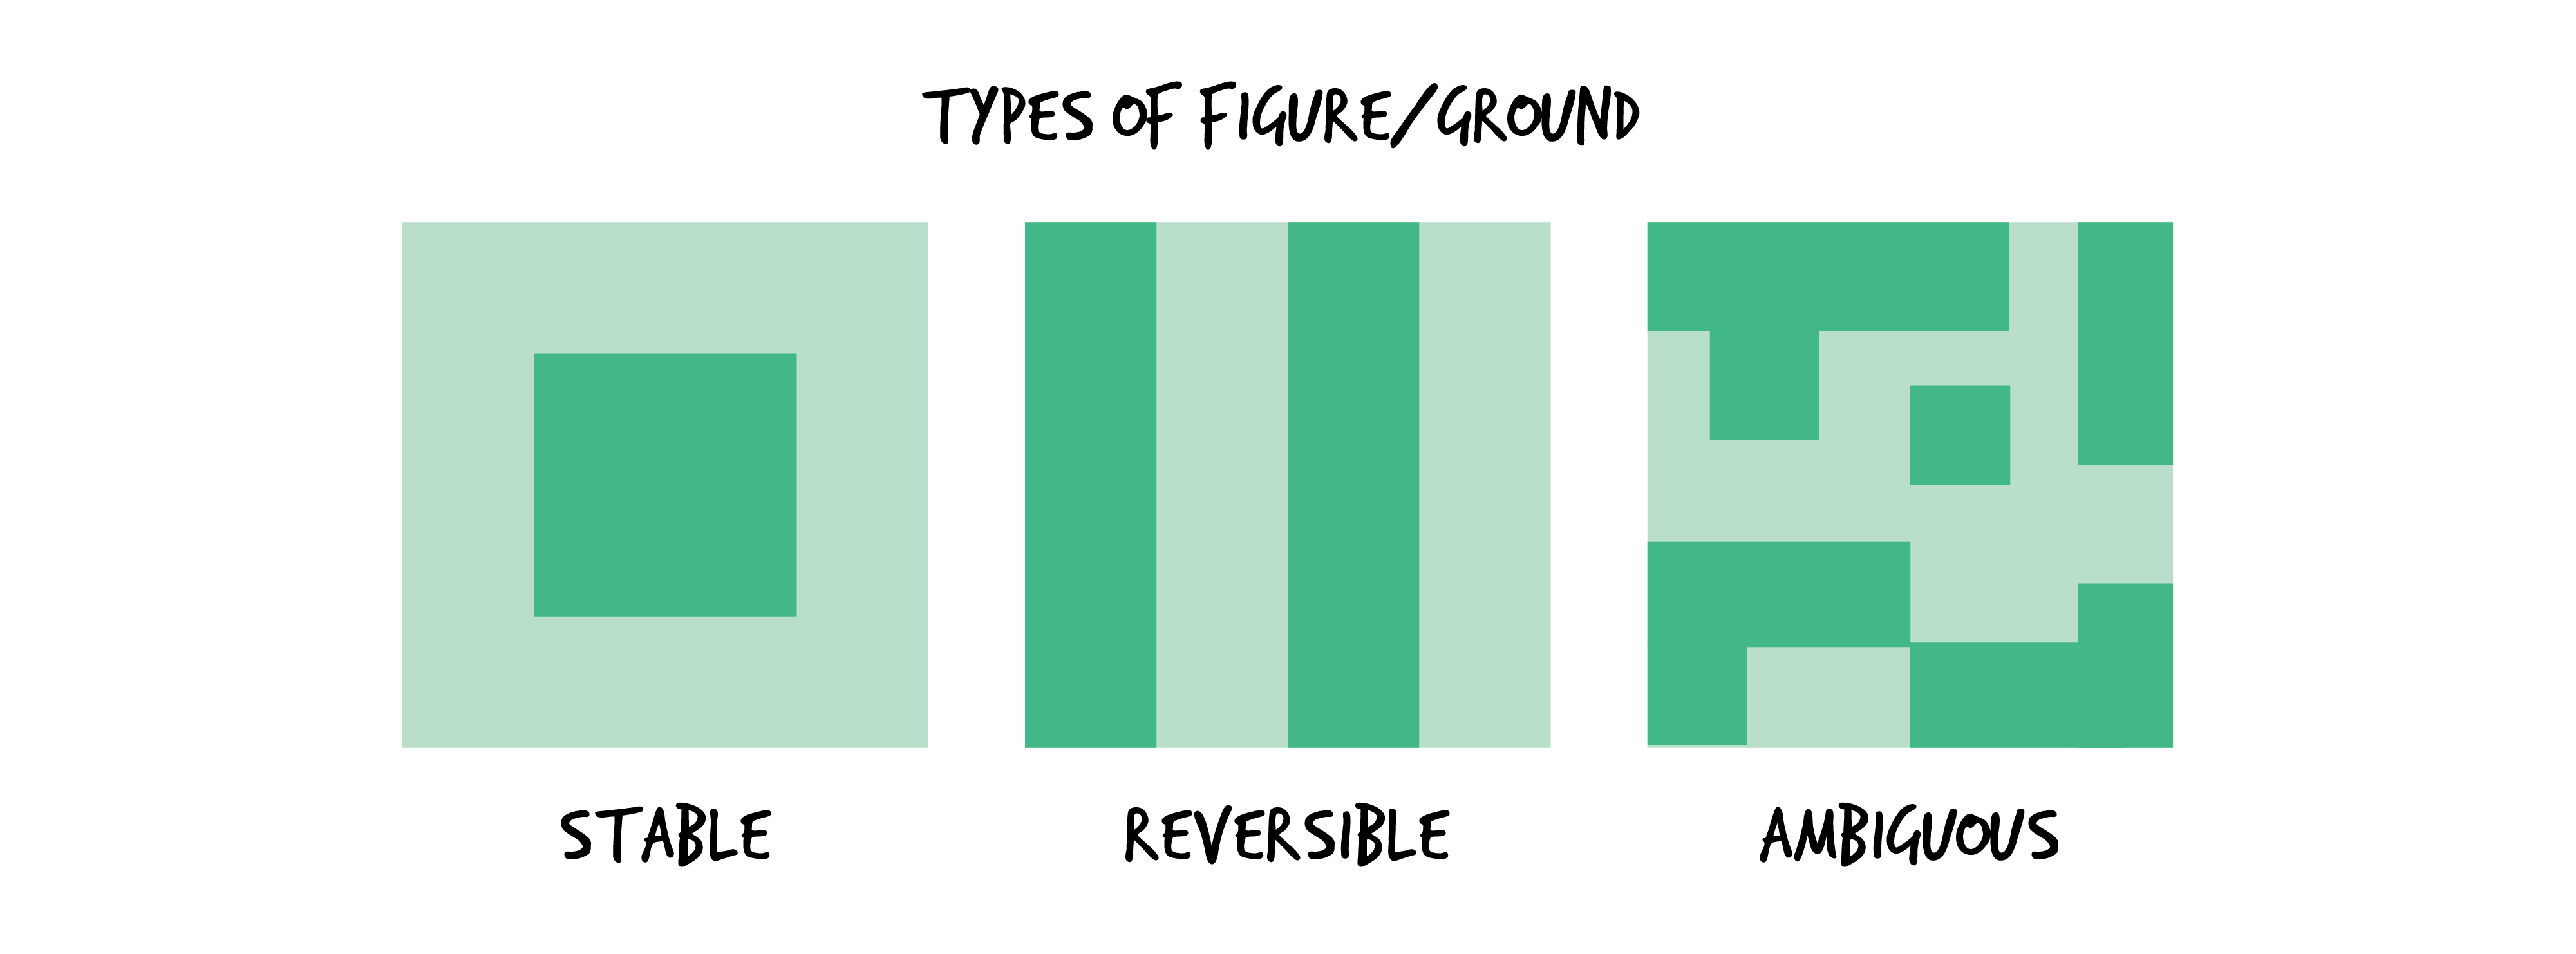 Three images illustrate different types of figure/ground. The first image on the left shows a dark green square centred in a larger, light green square with the text Stable on the bottom. The second image shows a square with alternating dark and light green stripes with the text Reversible on the bottom. The third image shows a square with a geometric zig zag pattern in both of light and dark green elements with the text Ambiguous on the bottom.